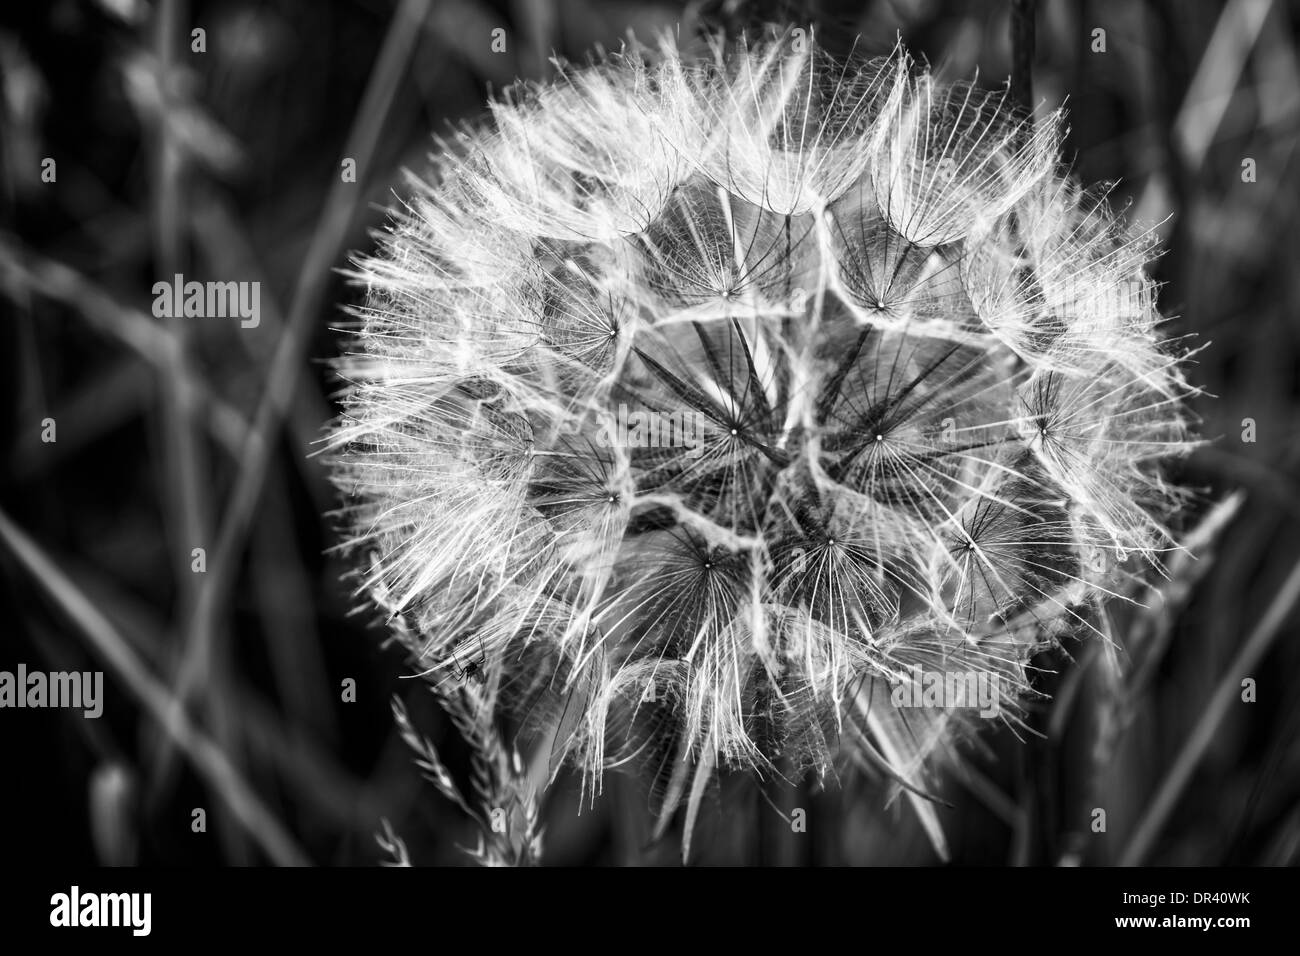 Black and White conversion of a Dandelion seed head Stock Photo